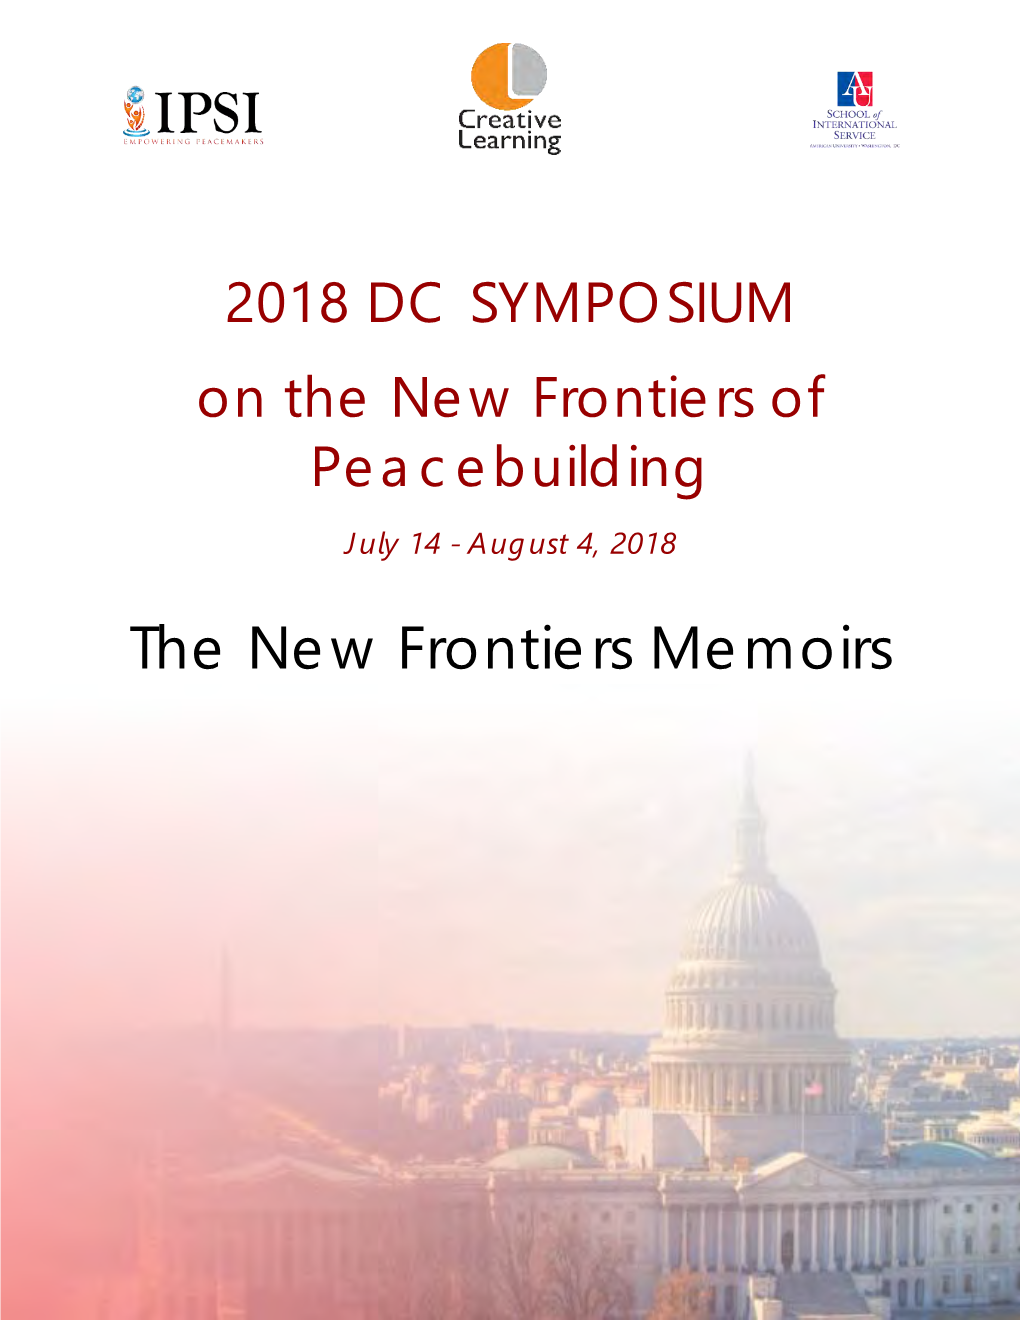 View the New Frontiers Memoirs